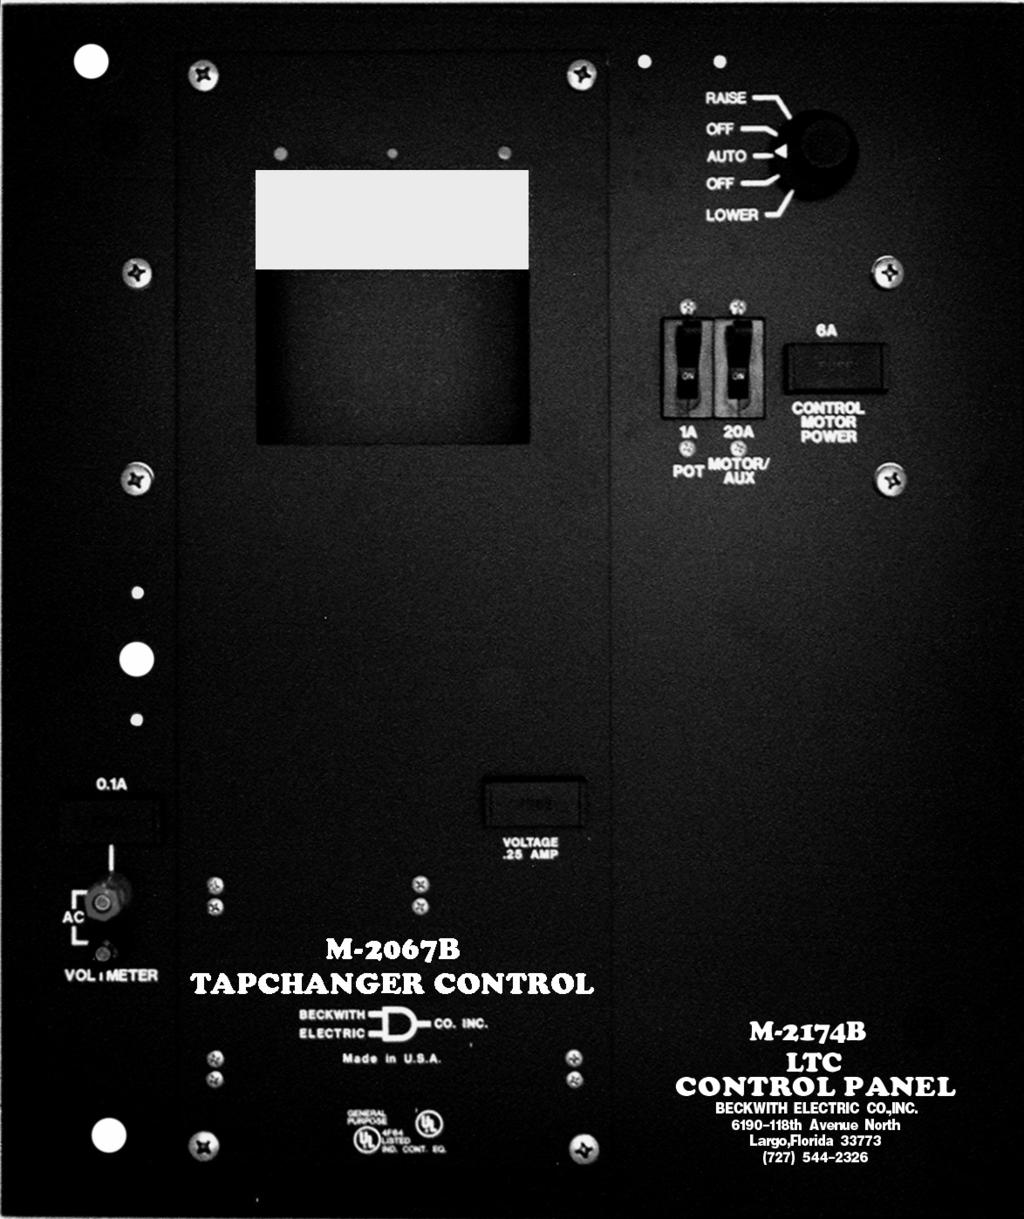 CONTROLS Replacement Panel M 174B Adapts M 001 Series Digital Tapchanger Control to Replace Moloney/Tempo LTC Control Panel Connects easily to the M 001 Series Digital Tapchanger Control using